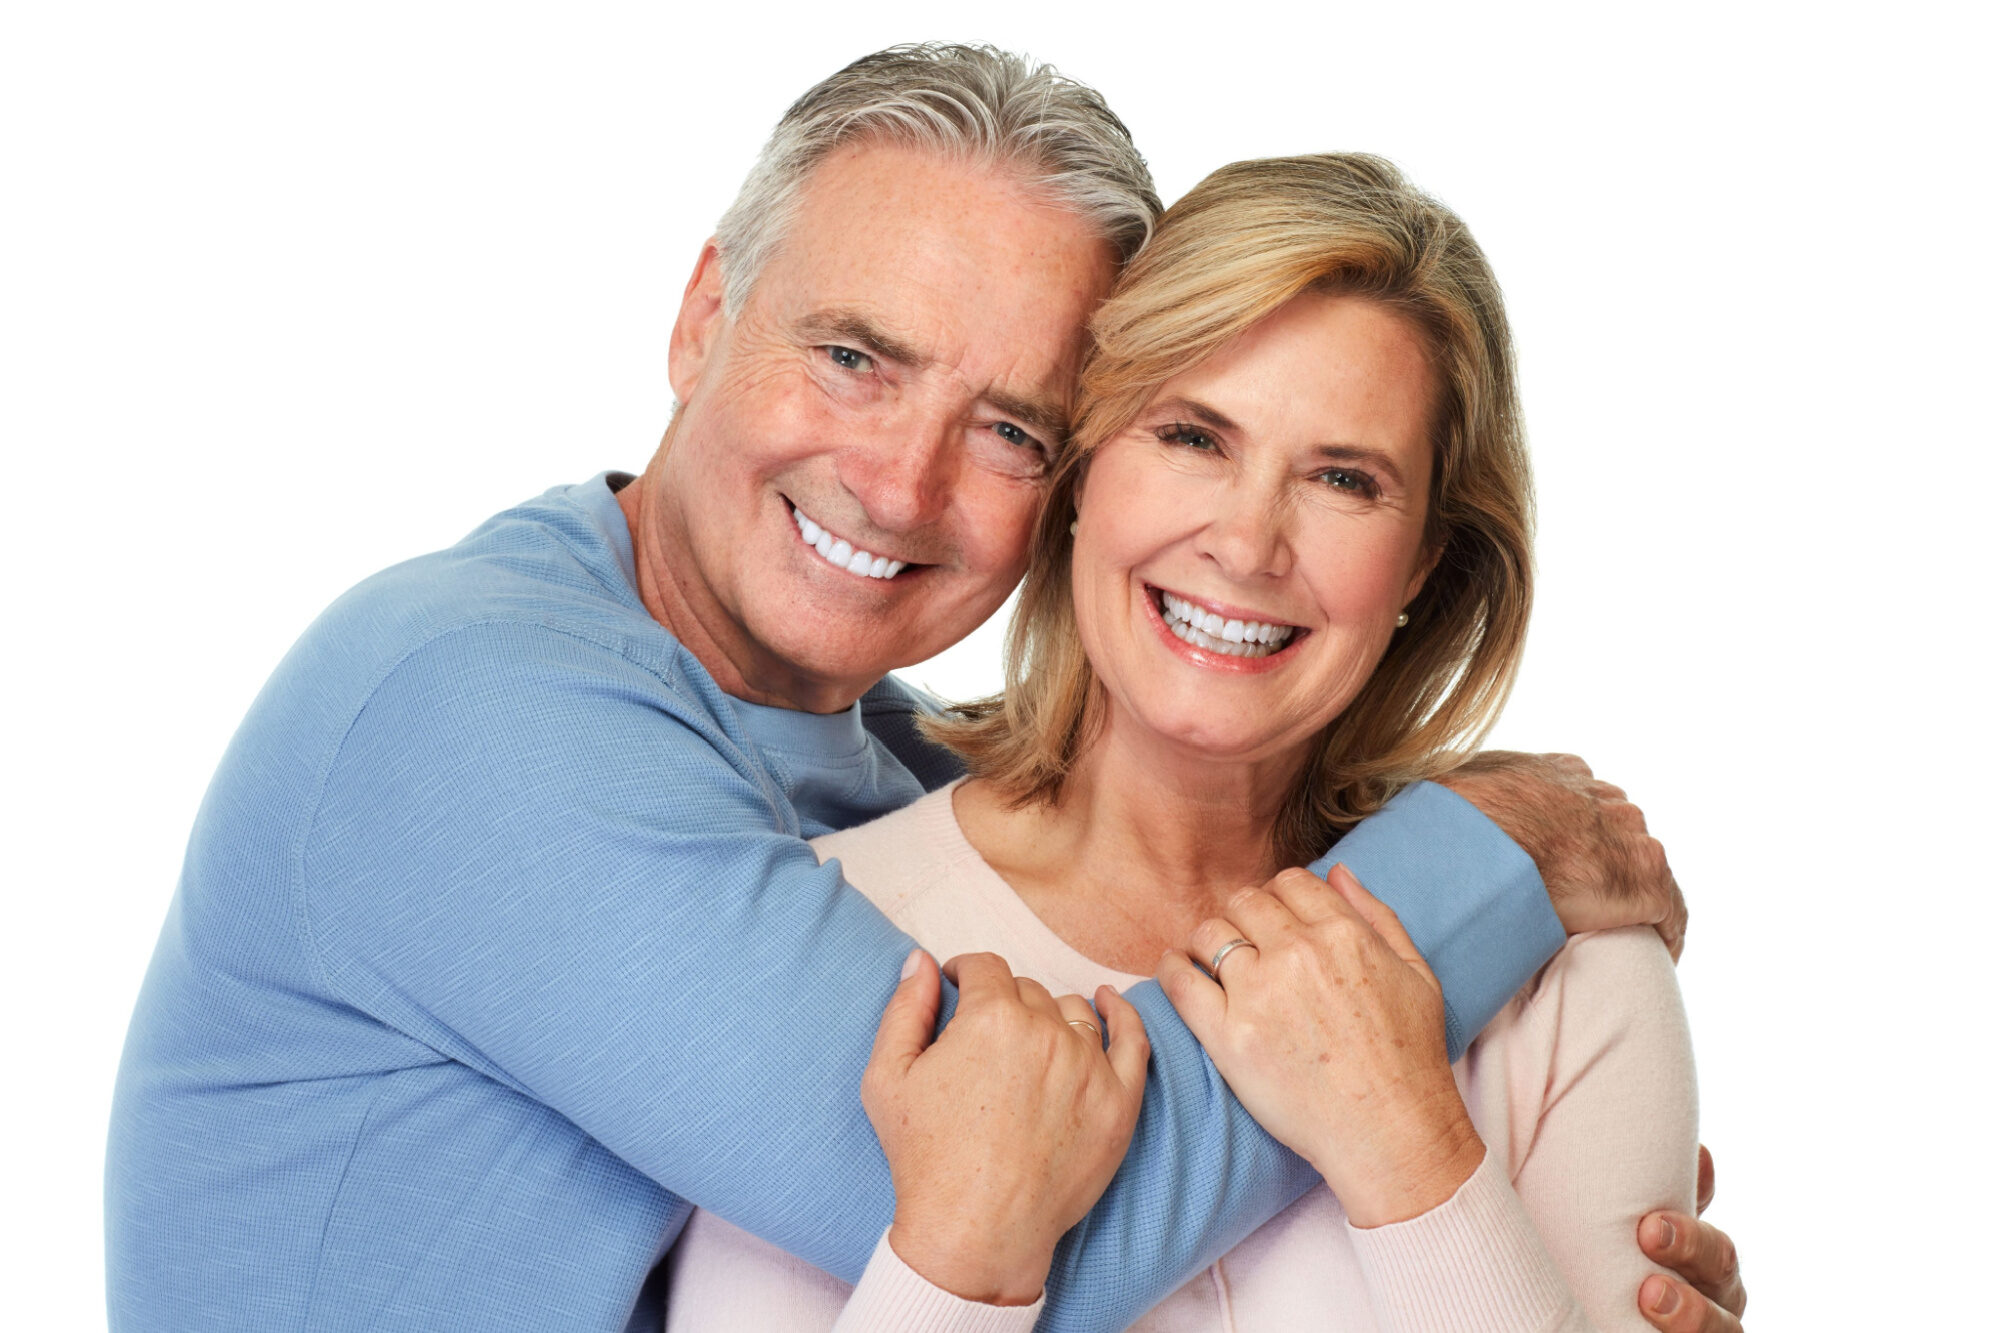 Uncovering the Smile of Your Dreams: The Benefits of Full-Mouth Restoration Full-Mouth Restoration in Wichita. Houlik Family Dentistry. Family, Cosmetic, Emergency, Invisalign, Implant Dentistry in Wichita, KS 67205. Ph:316-721-4334 Dr. Joseph Houlik Dr. Lily Wakim Houlik Family Dentistry. General, Cosmetic, Preventative, Family Dentistry in Wichita, KS 67205